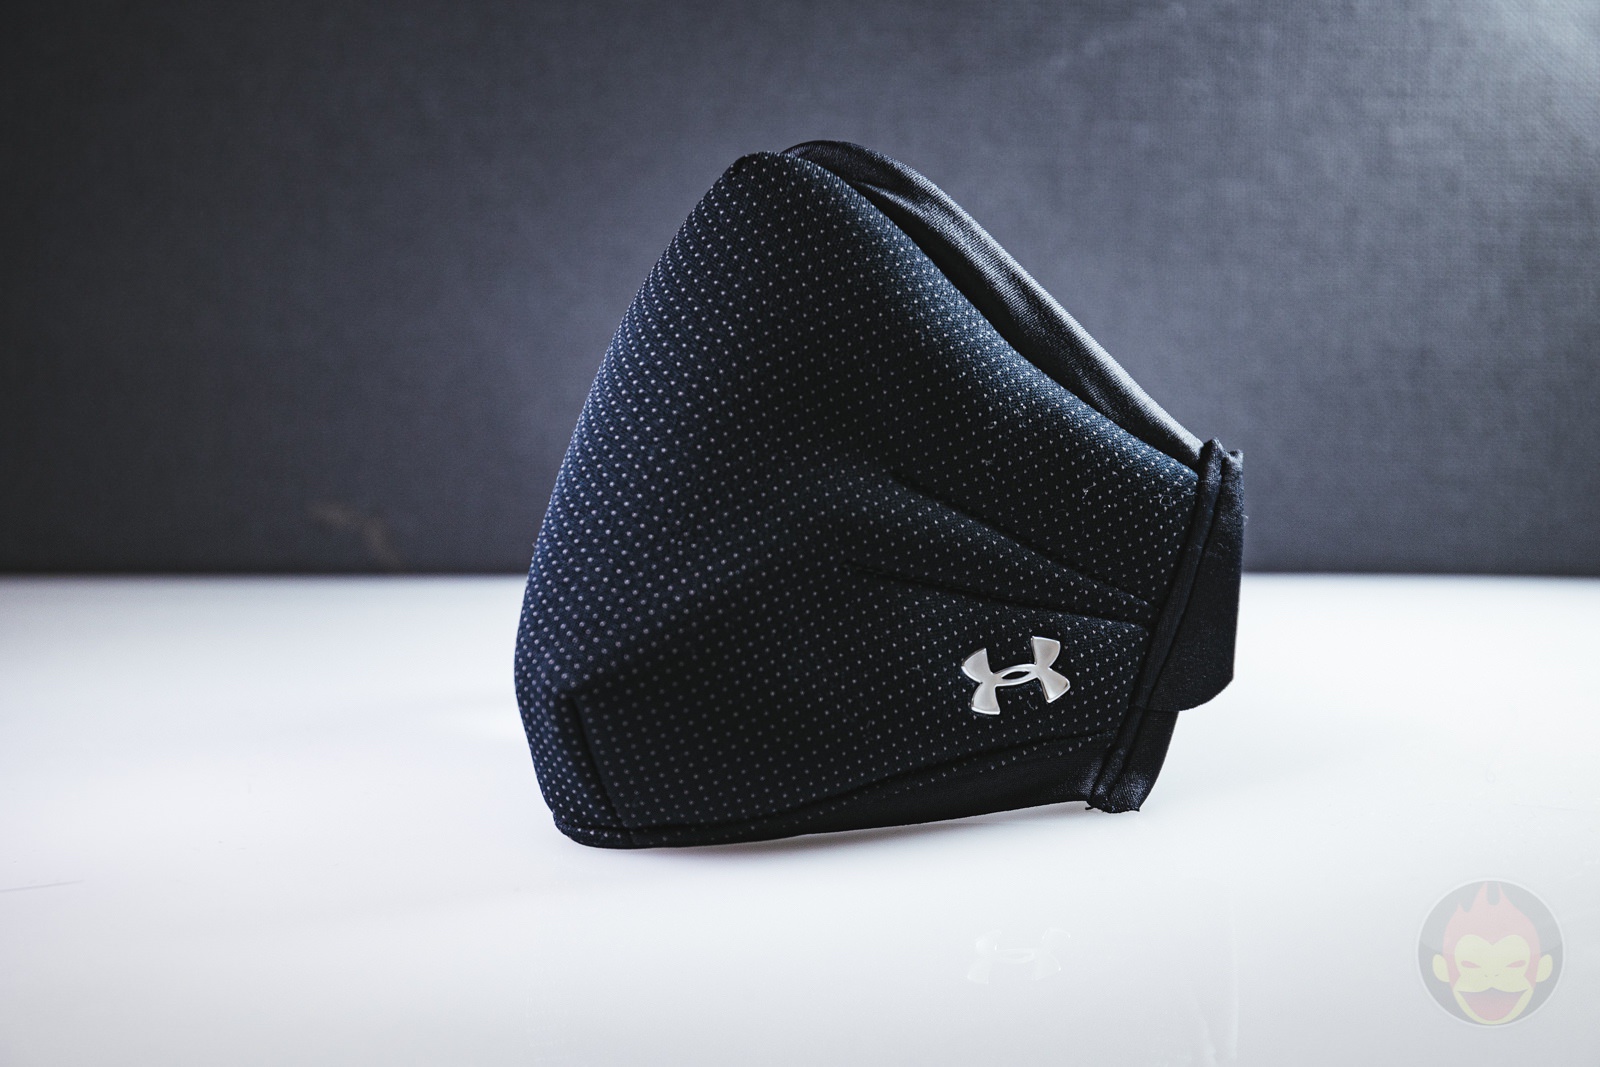 Under Armor Sports Mask Review 02